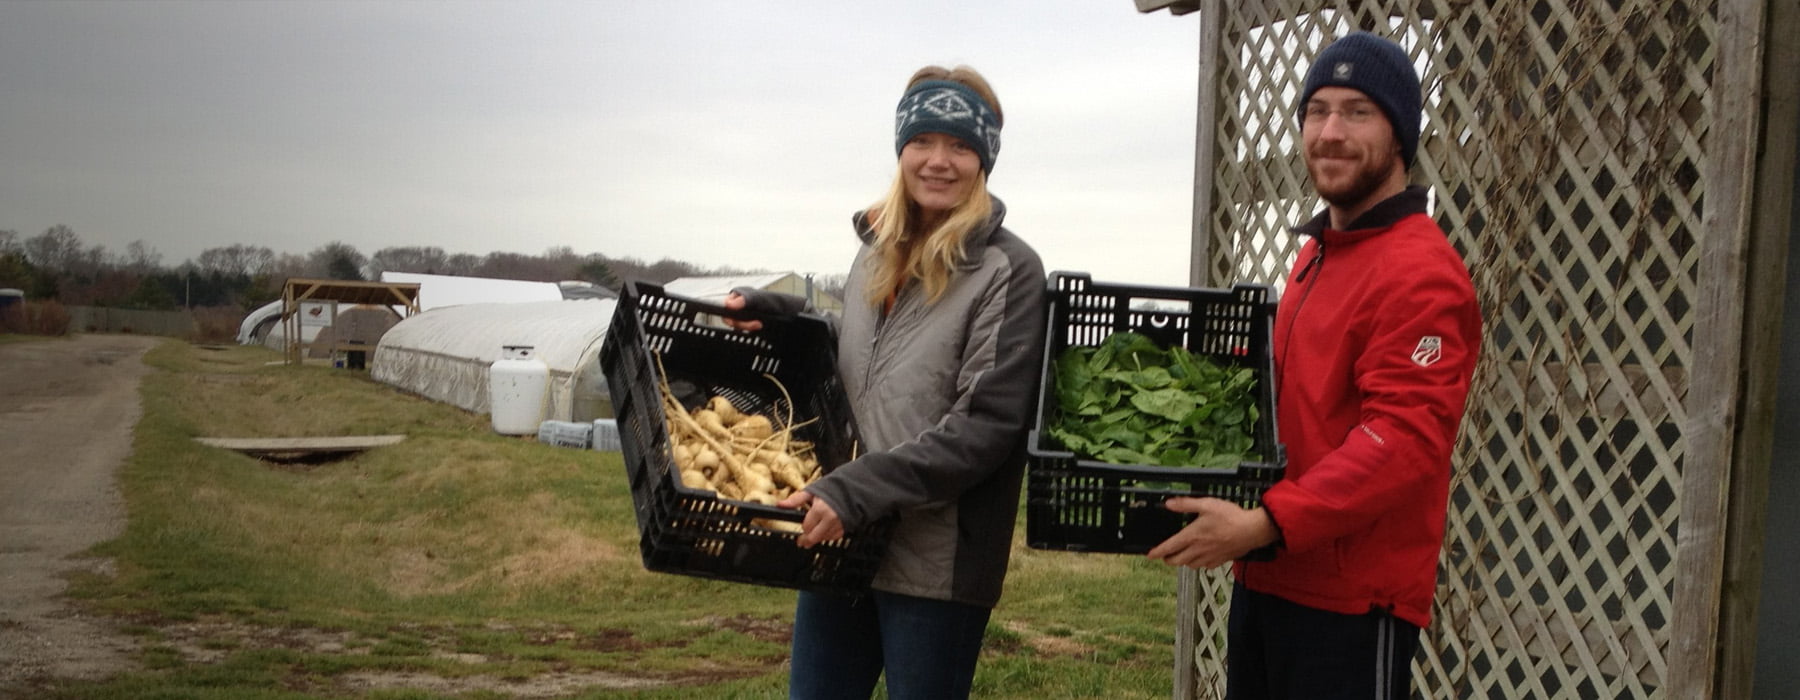 Food pantry Farm: Darcy and jack helping load fresh produce into